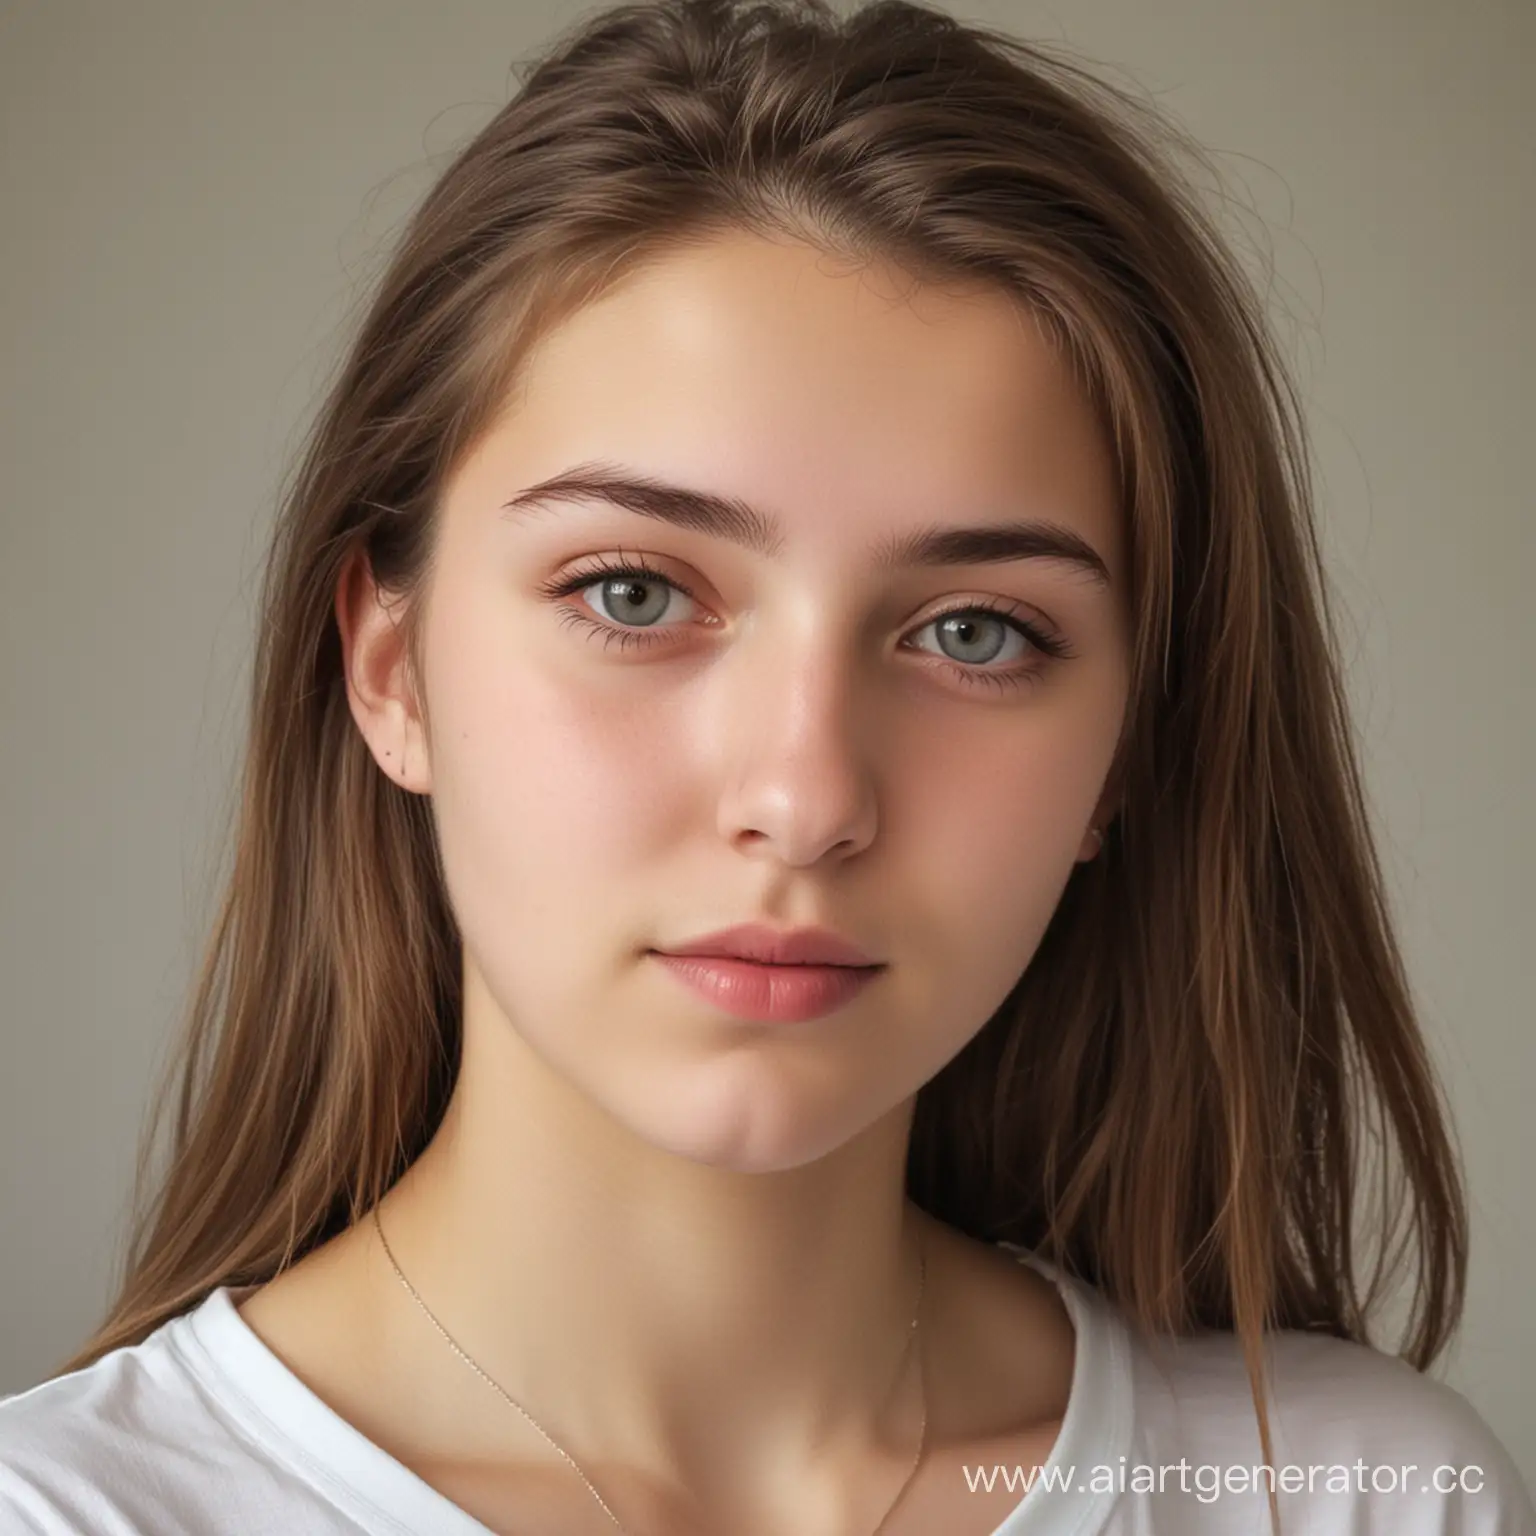 Portrait-of-an-18YearOld-Girl-with-Radiant-Confidence